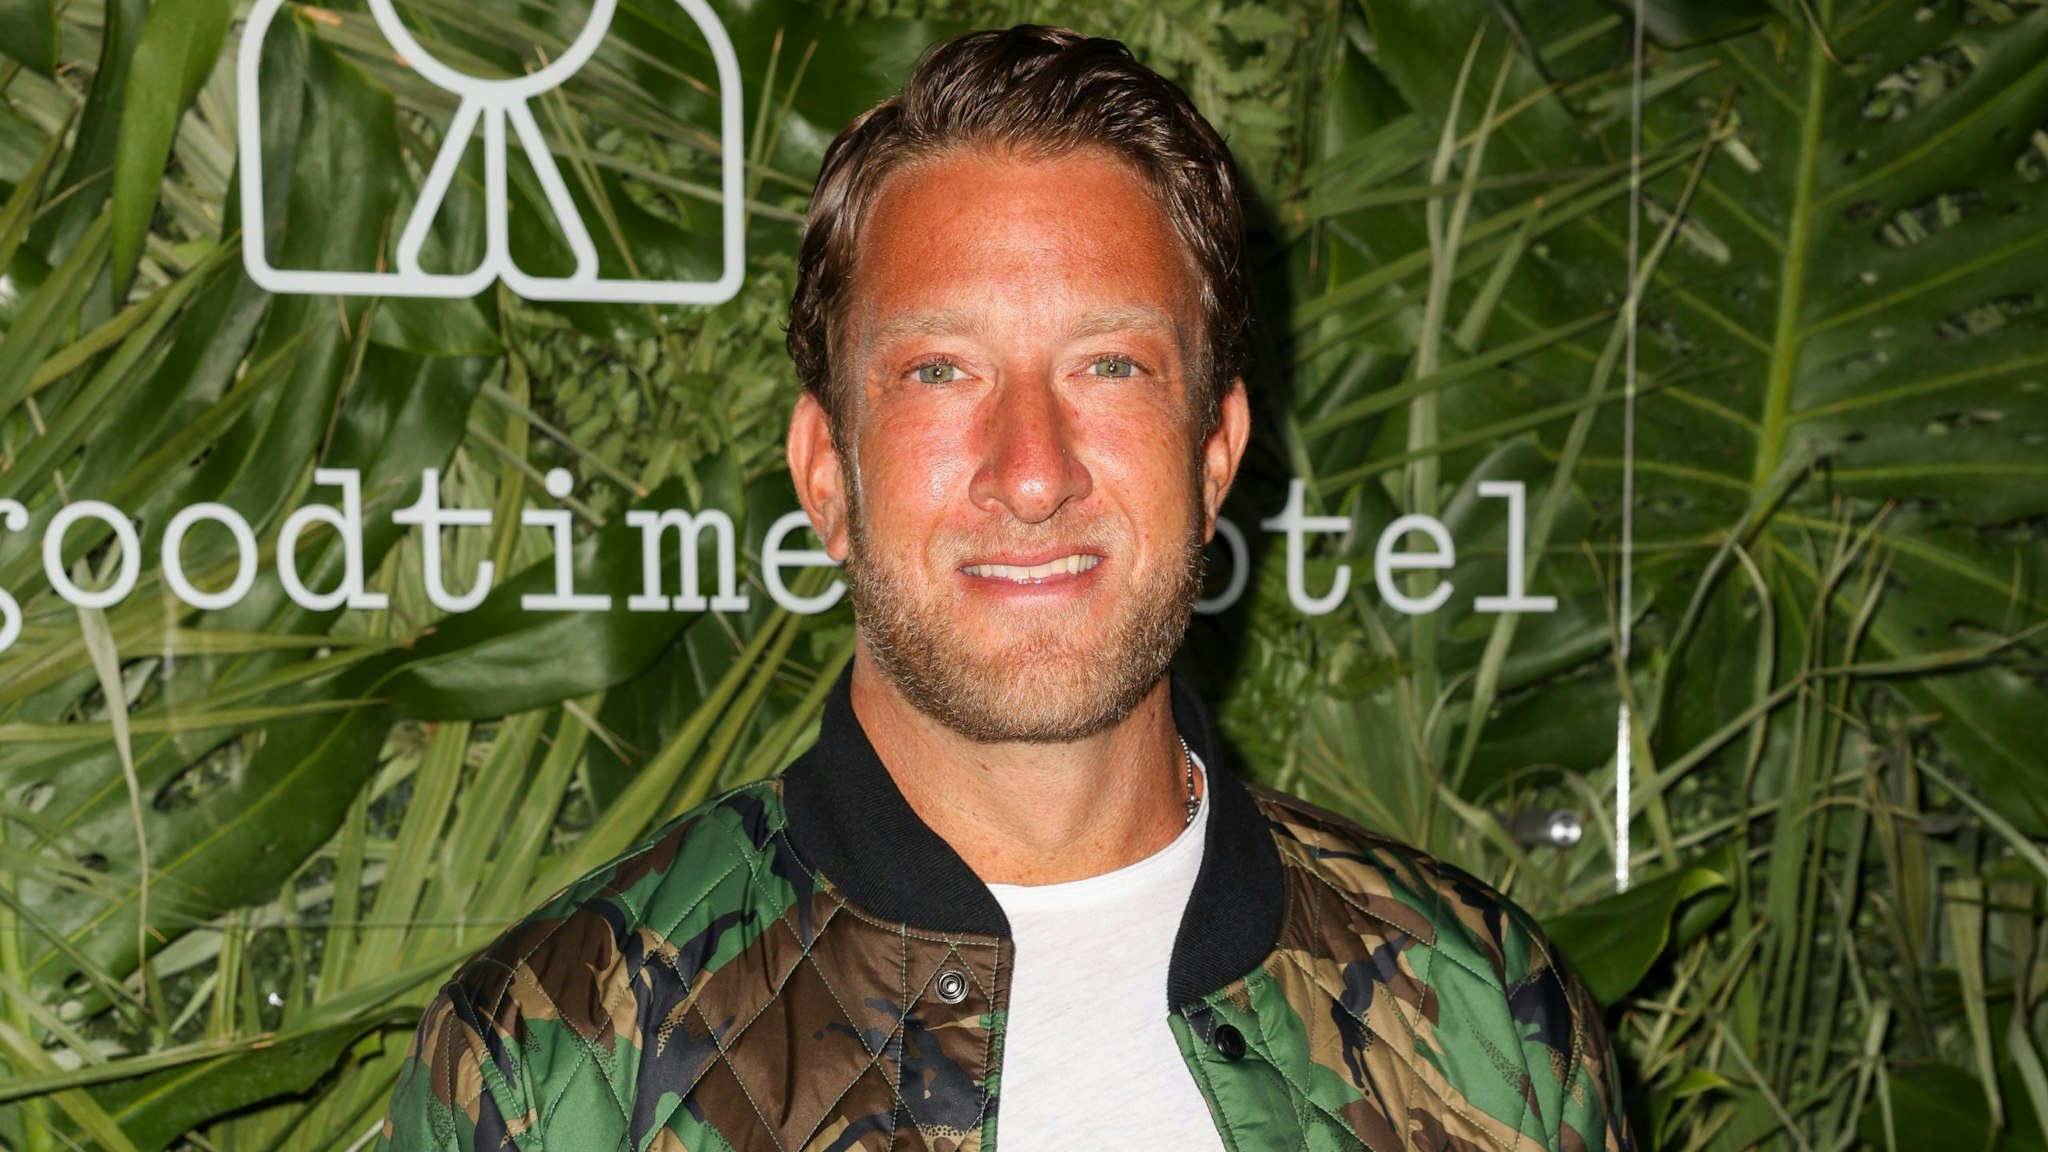 MIAMI BEACH, FLORIDA - APRIL 16: David Portnoy attends the Inter Miami CF Season Opening Party Hosted By David Grutman And Pharrell Williams at The Goodtime Hotel on April 16, 2021 in Miami Beach, Florida.